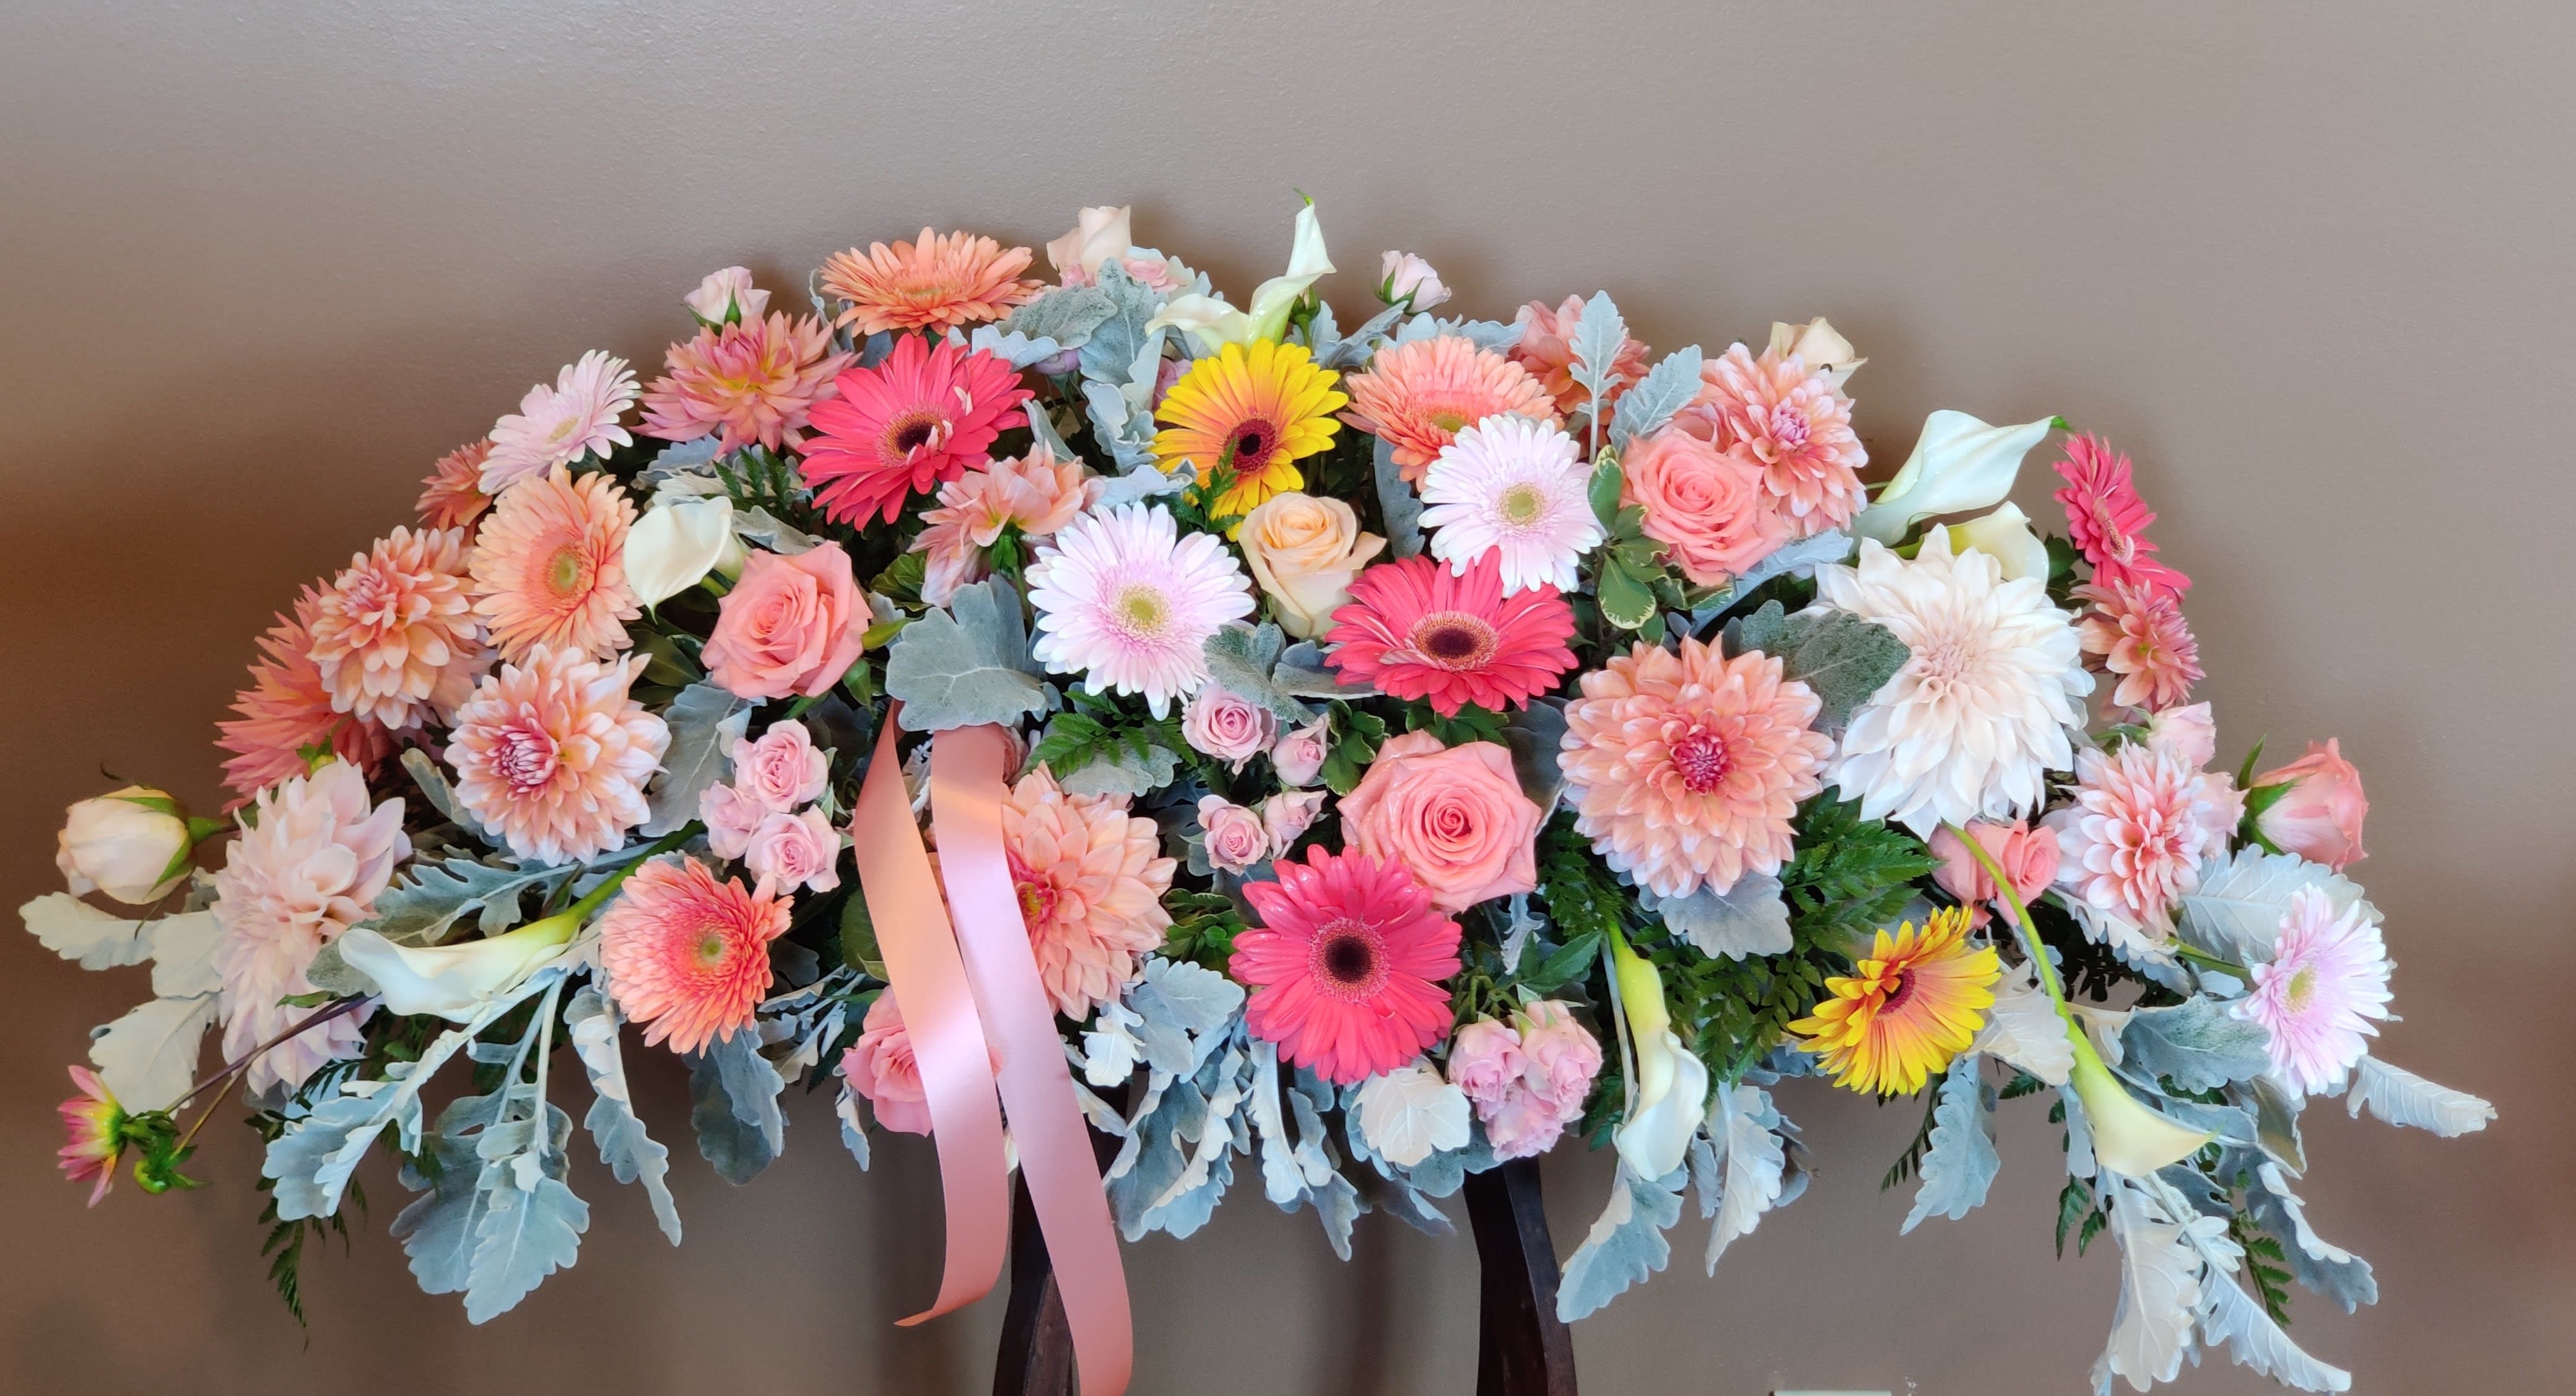 Beautiful Remenbrance of You - Shades of Peach, pink, and white all arranged with foliage for a thoughtful tribute for a bright life. 